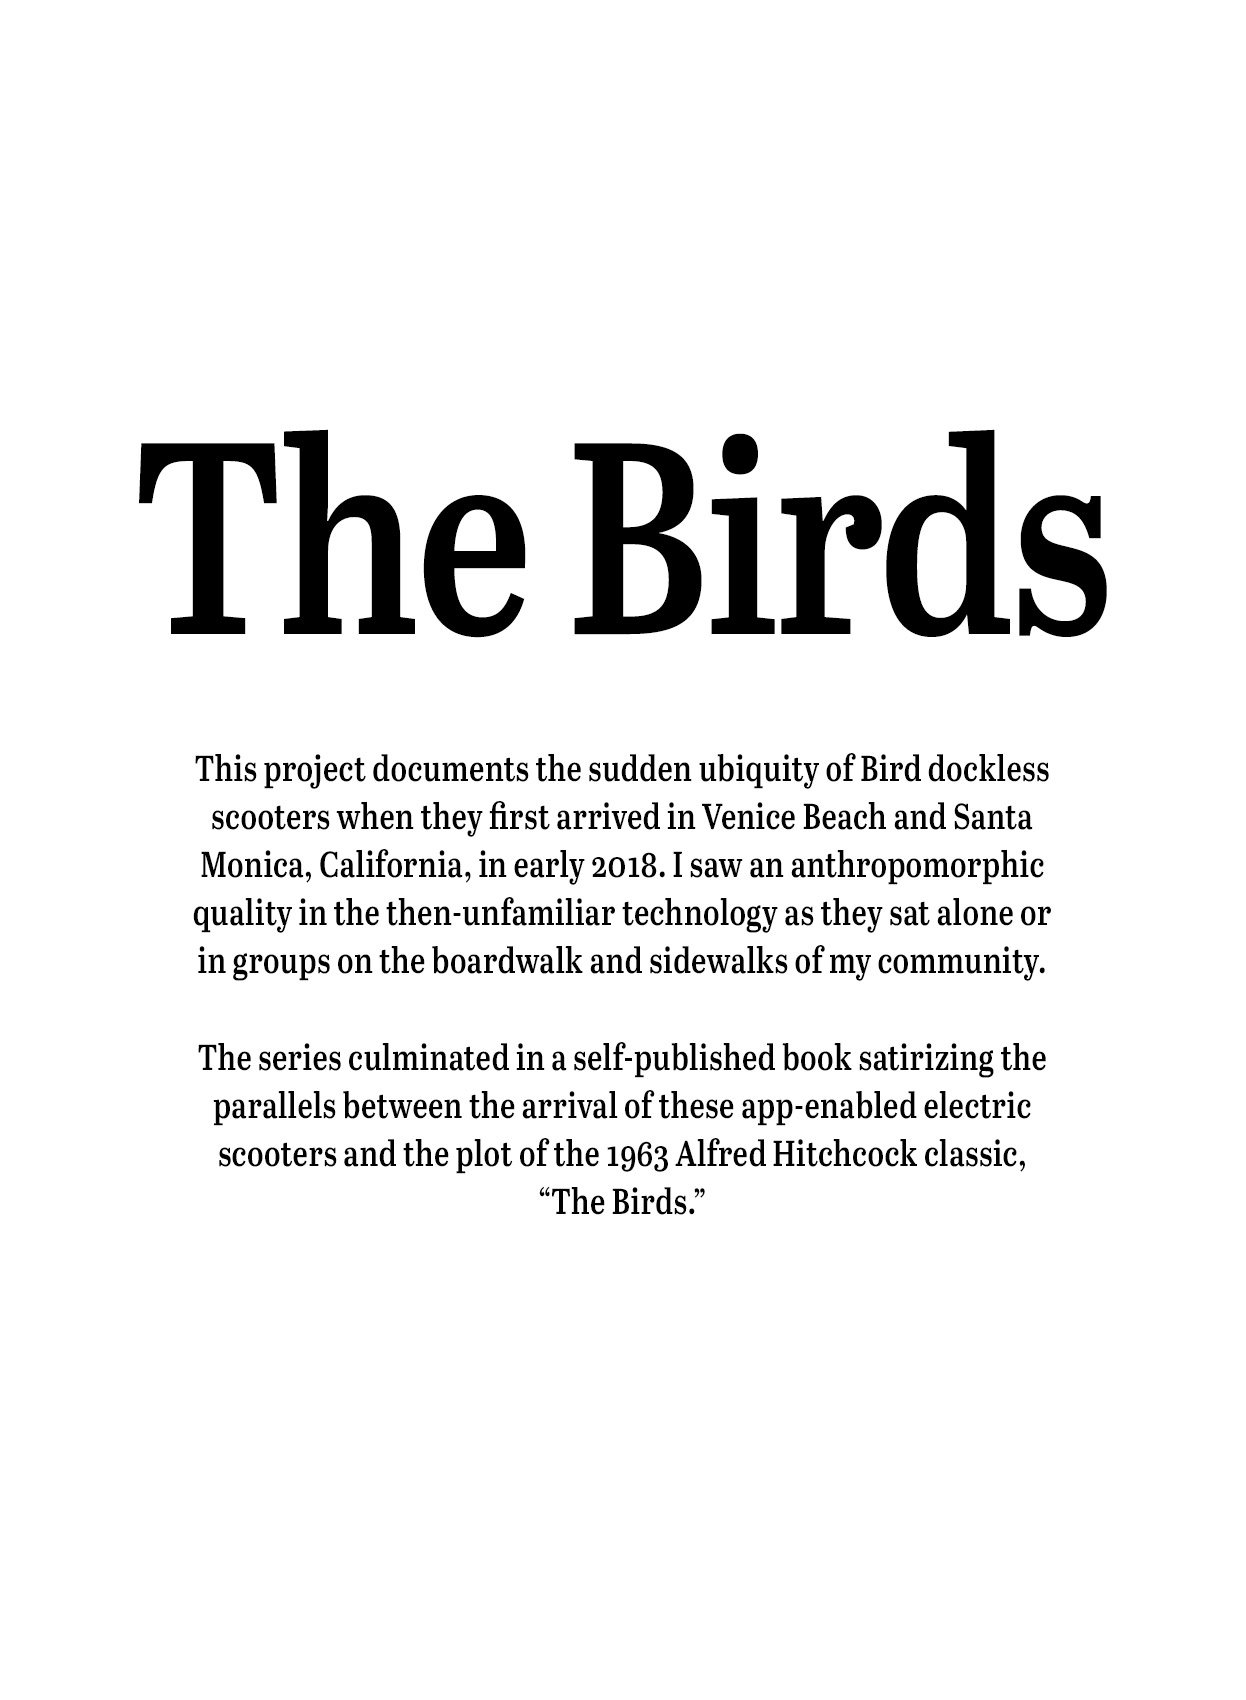 birds_title_page_b